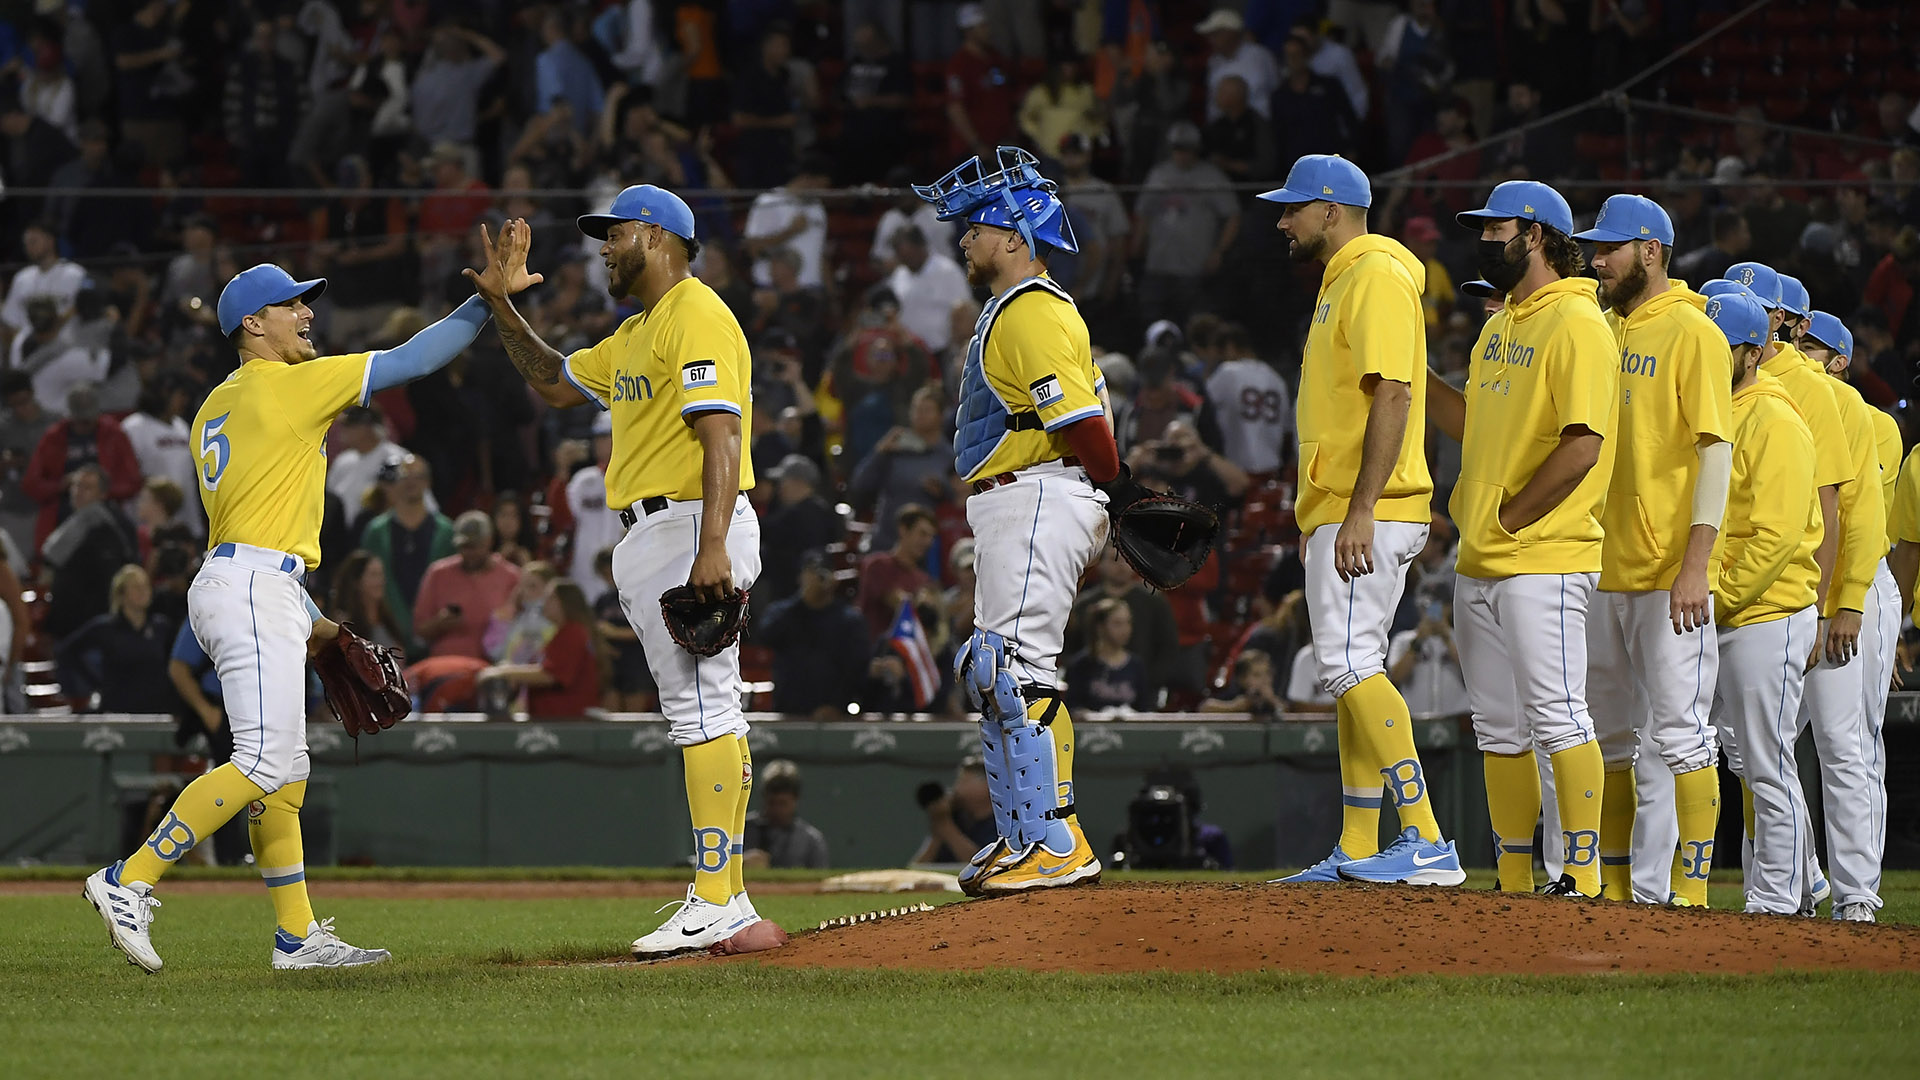 blue and yellow uniforms